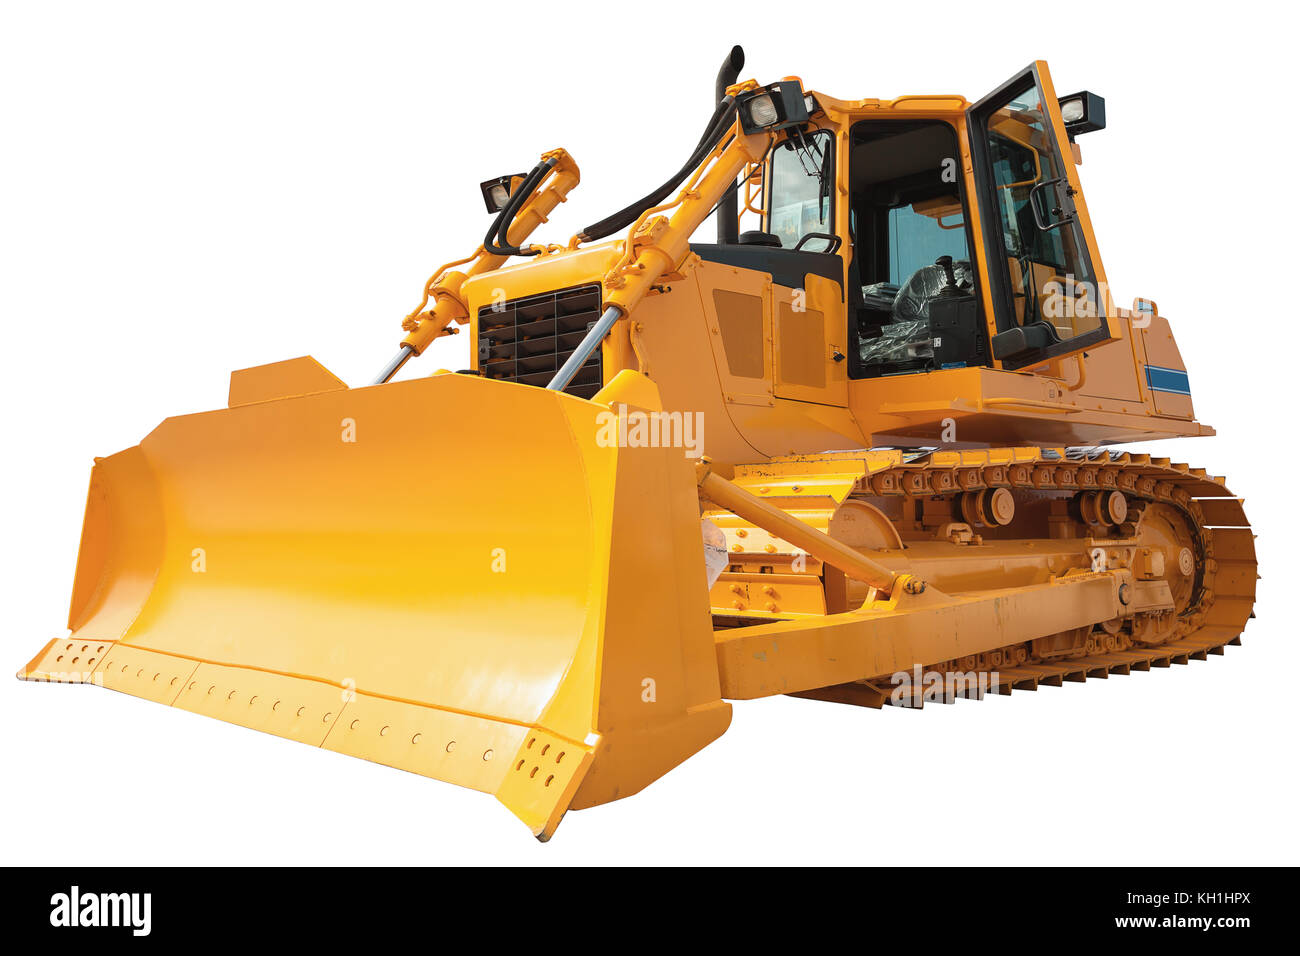 New modern loader or bulldozer - excavator isolated on white background with clipping path Stock Photo